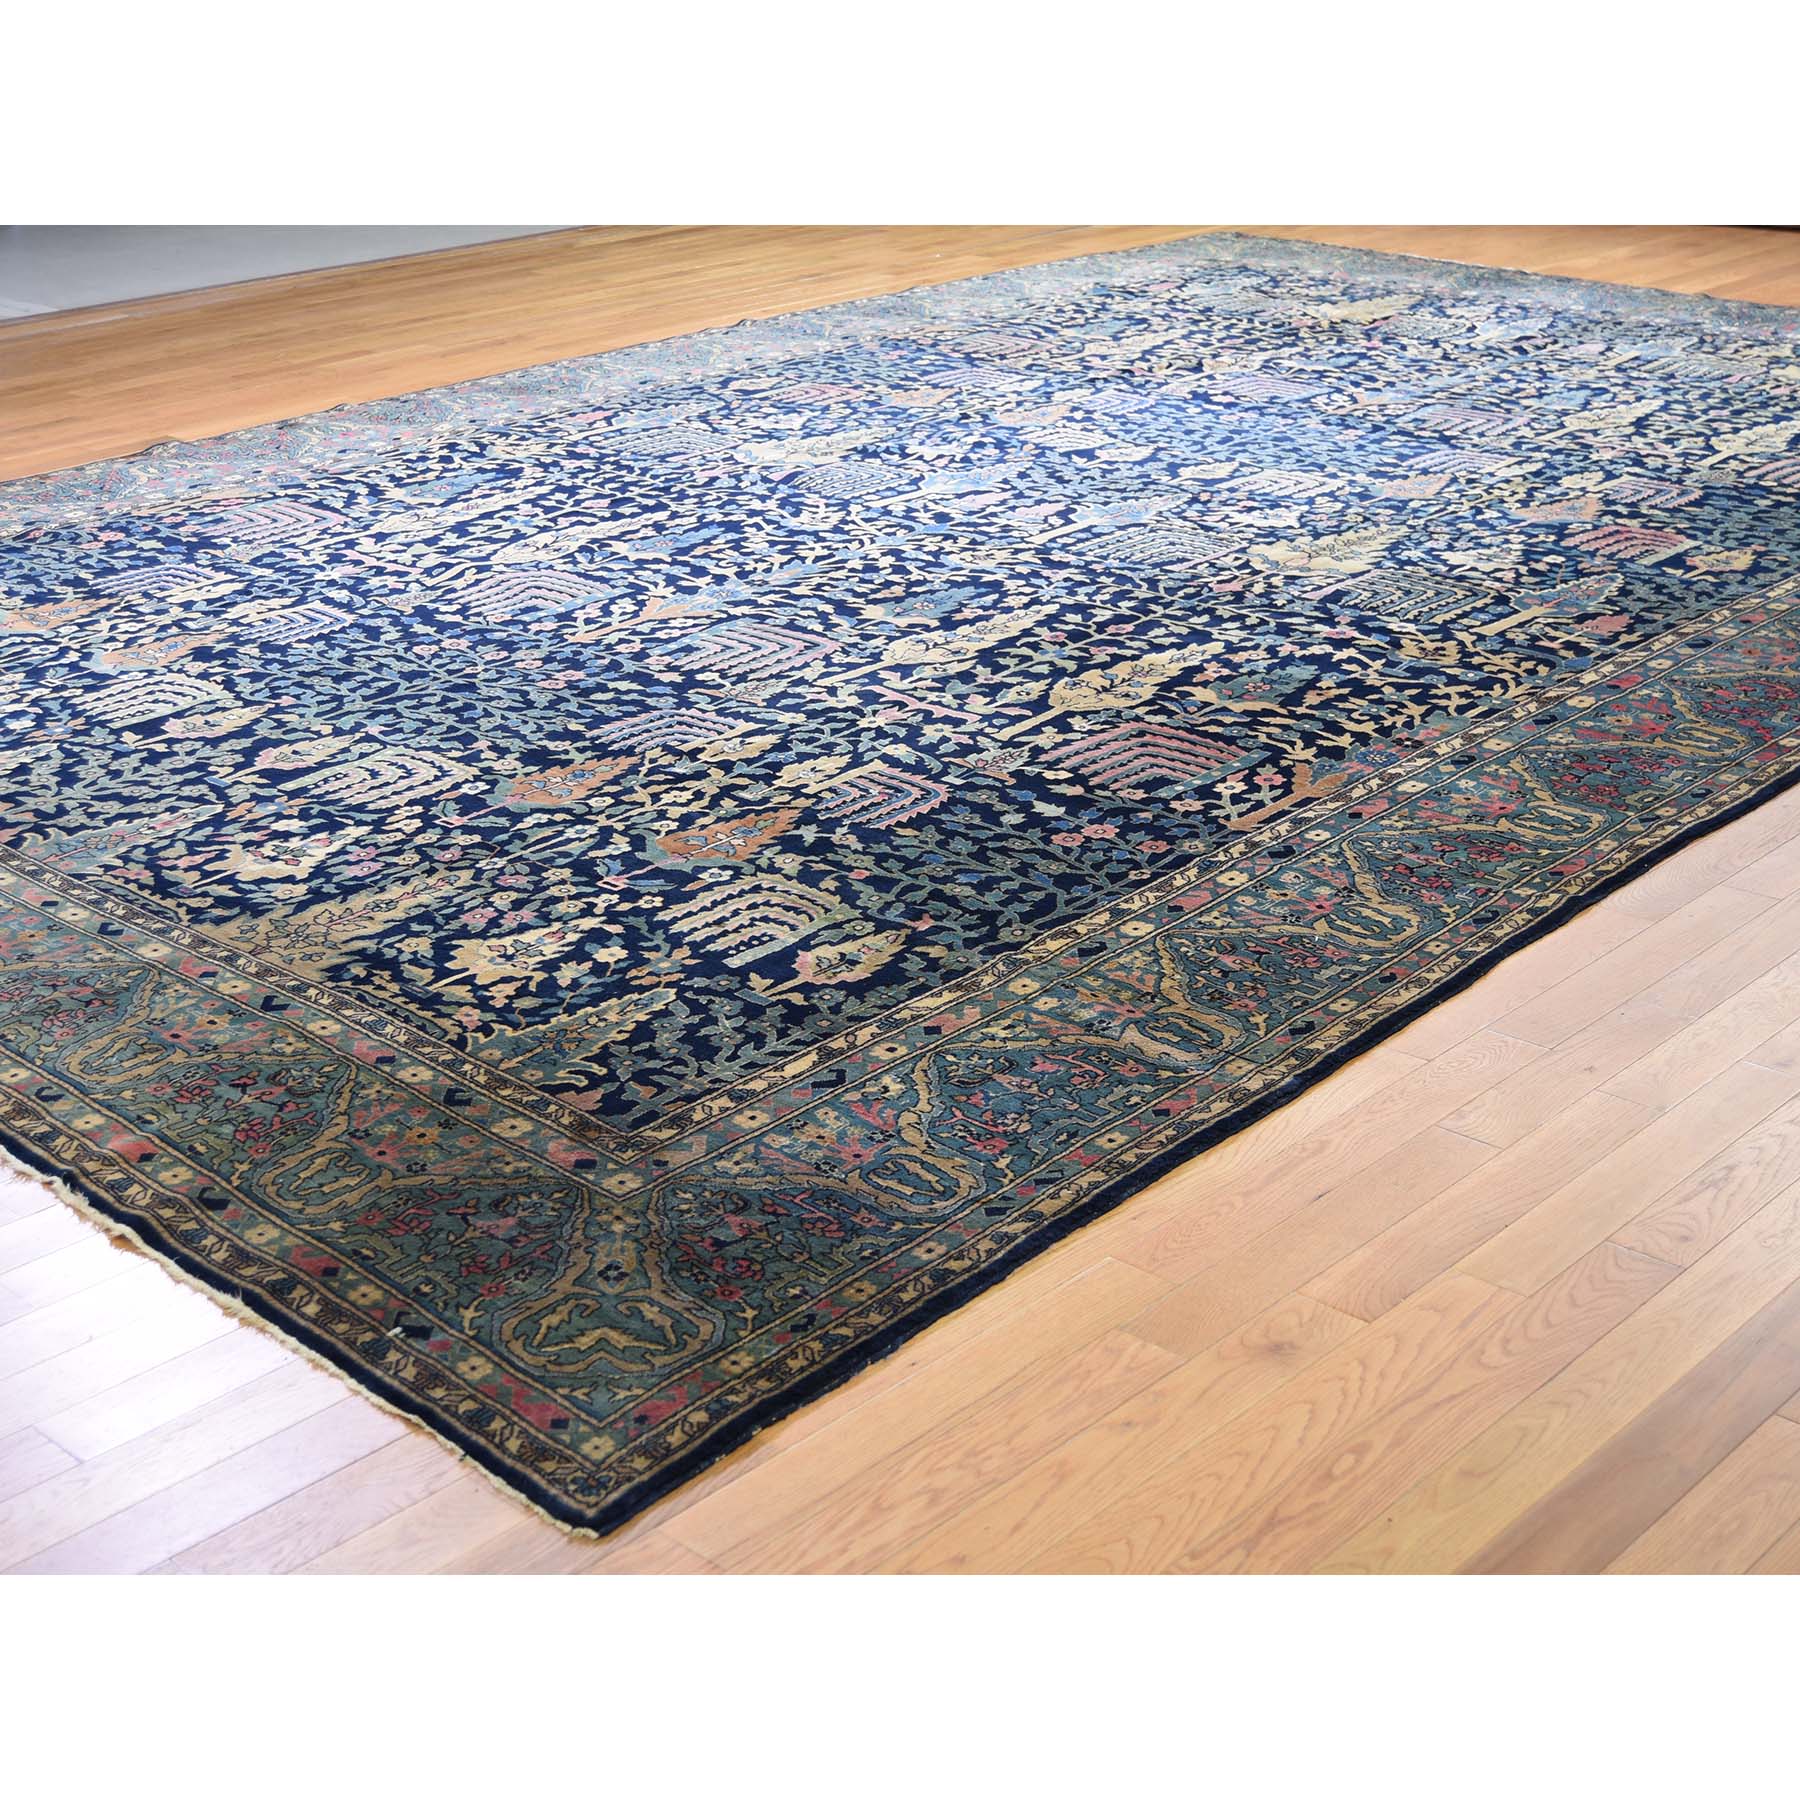 11-7 x17-8  Antique Maharaja Kashmir Oversized Willow Tree Design Hand-knotted Oriental Rug 